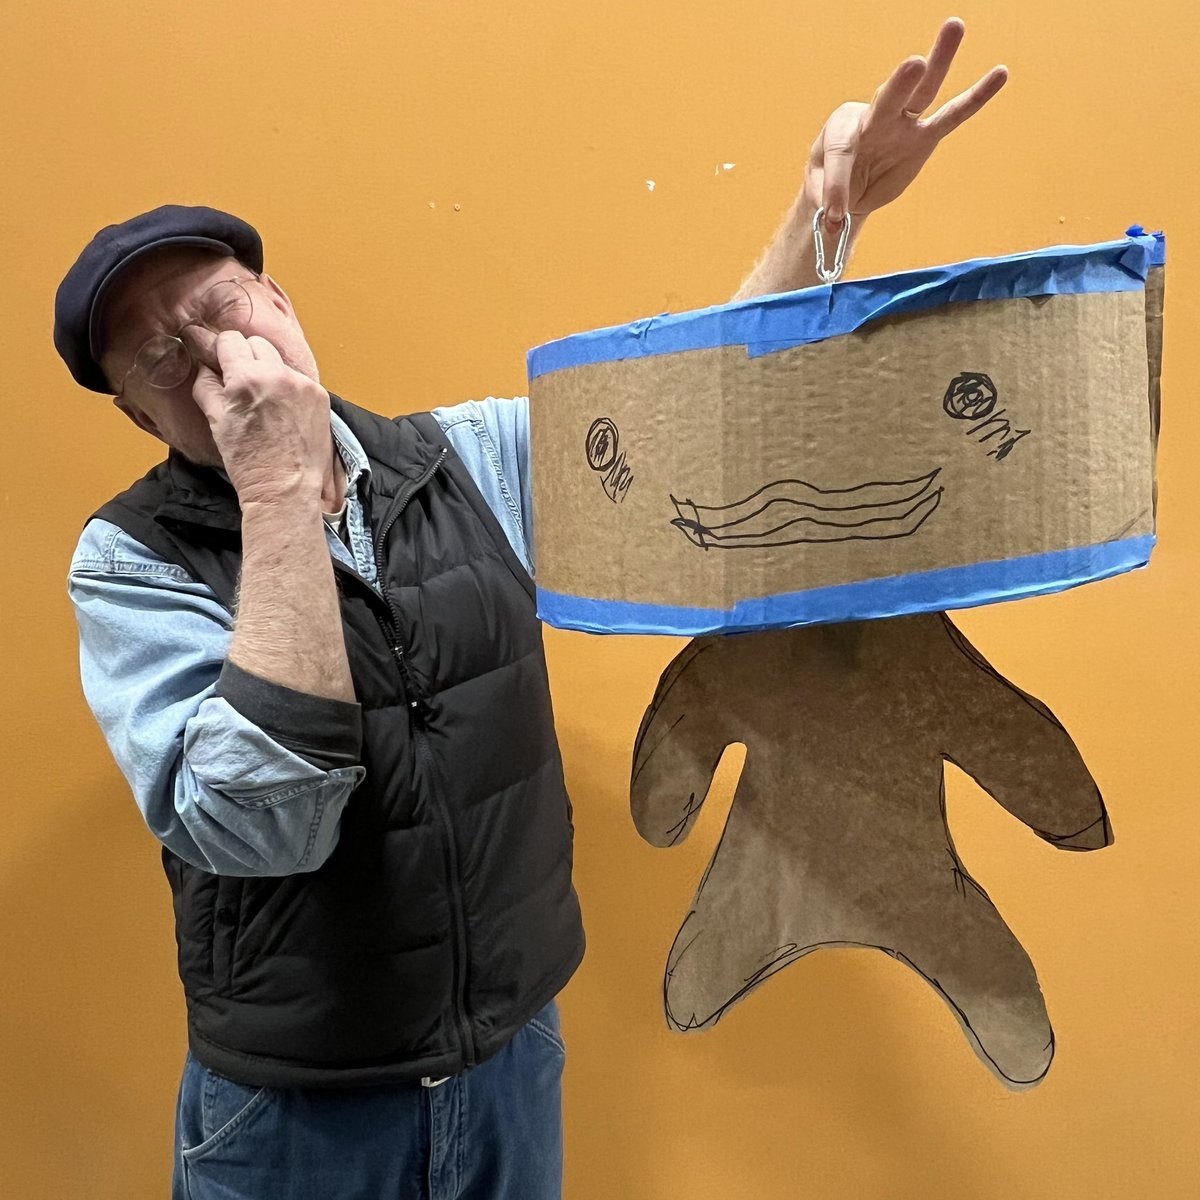 We’ve begun making a man out of stinky cheese. 

So far he’s just a paper and cardboard prototype so we can figure out how big he should be.

📗: The Stinky Cheese Man and Other Fairly Stupid Tales by @Jon_Scieszka & Lane Smith (@VikingChildrens)

#WipWednesday